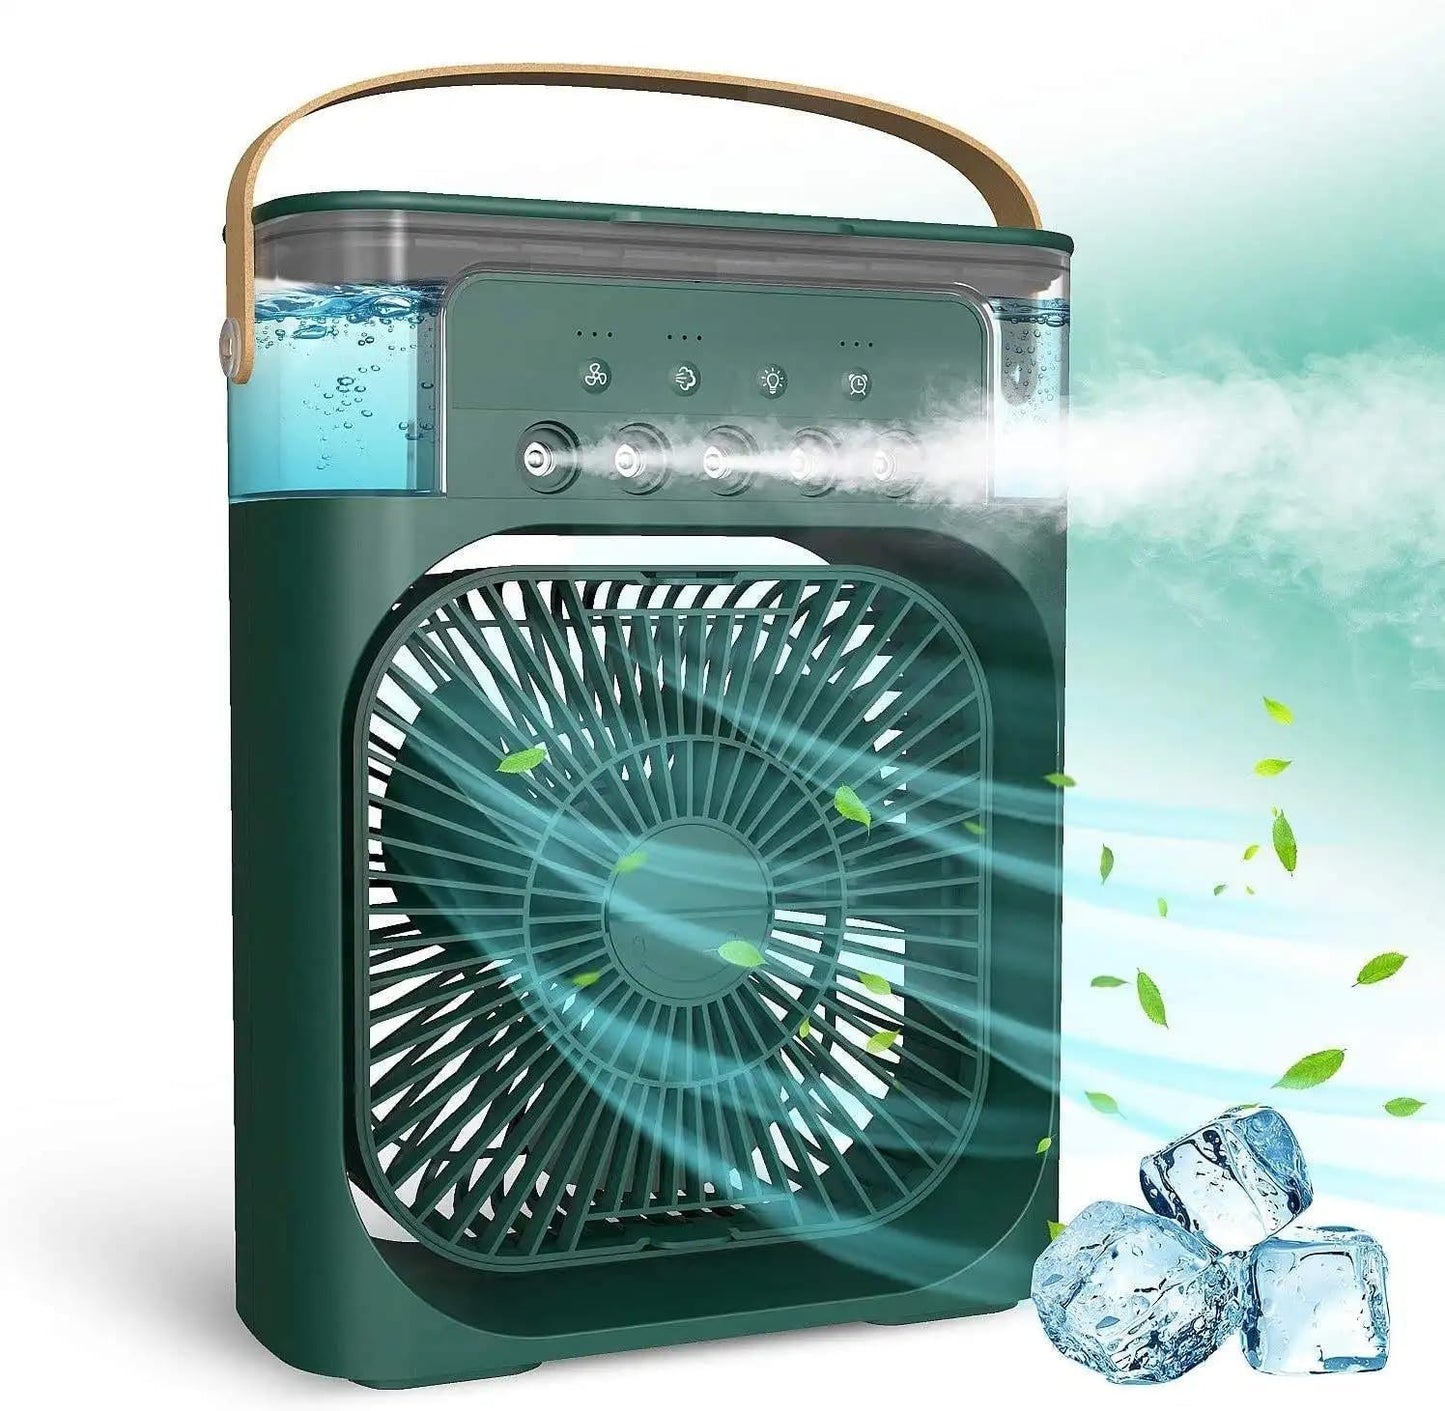 Portable Air Conditioner Fan, 500 ml Water Tank USB Personal Cooler, Mini Humidifier Fan with 7 Colors LED Light